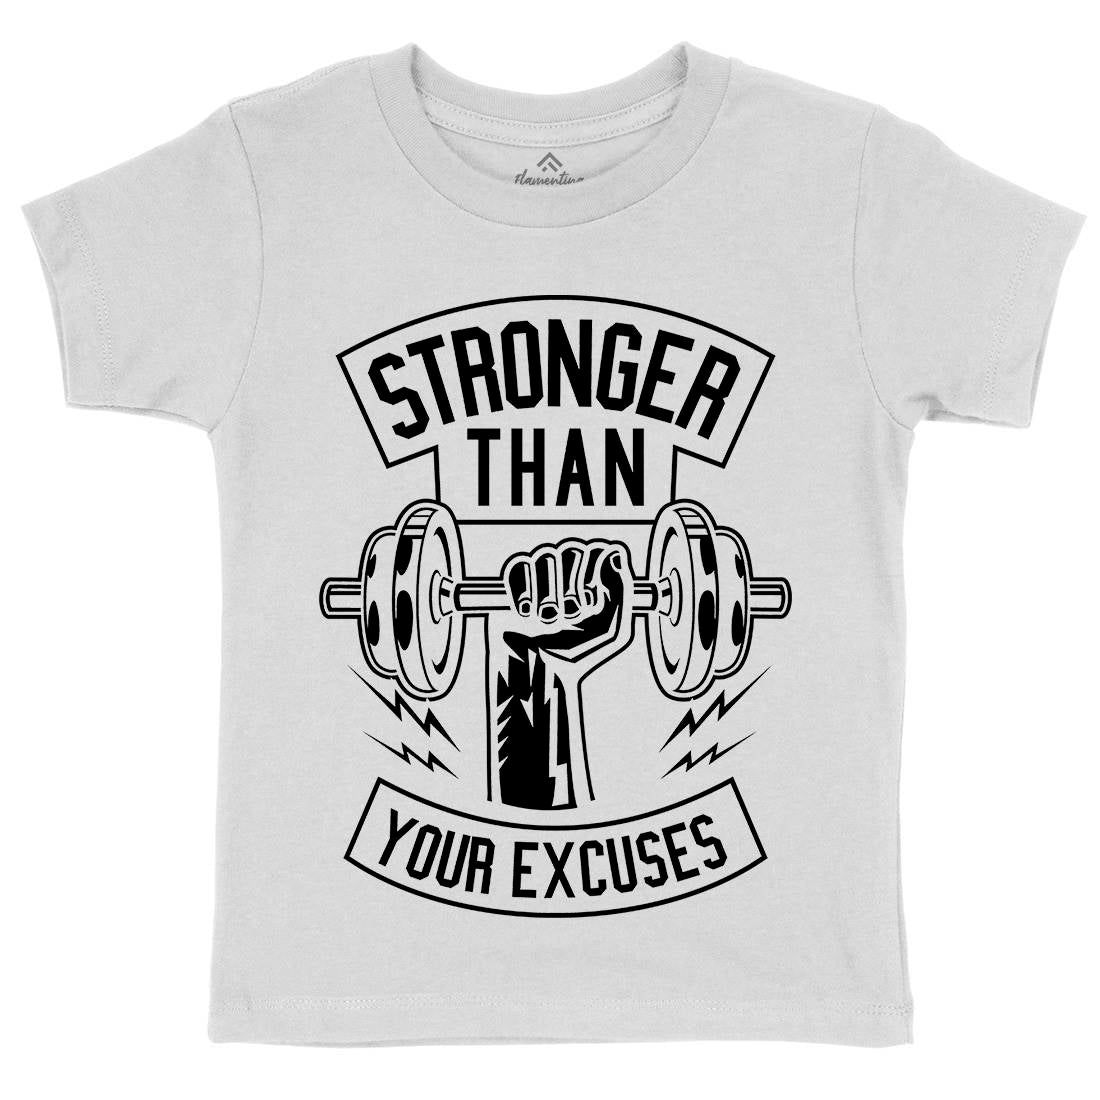 Stronger Than Your Excuses Kids Crew Neck T-Shirt Gym B644